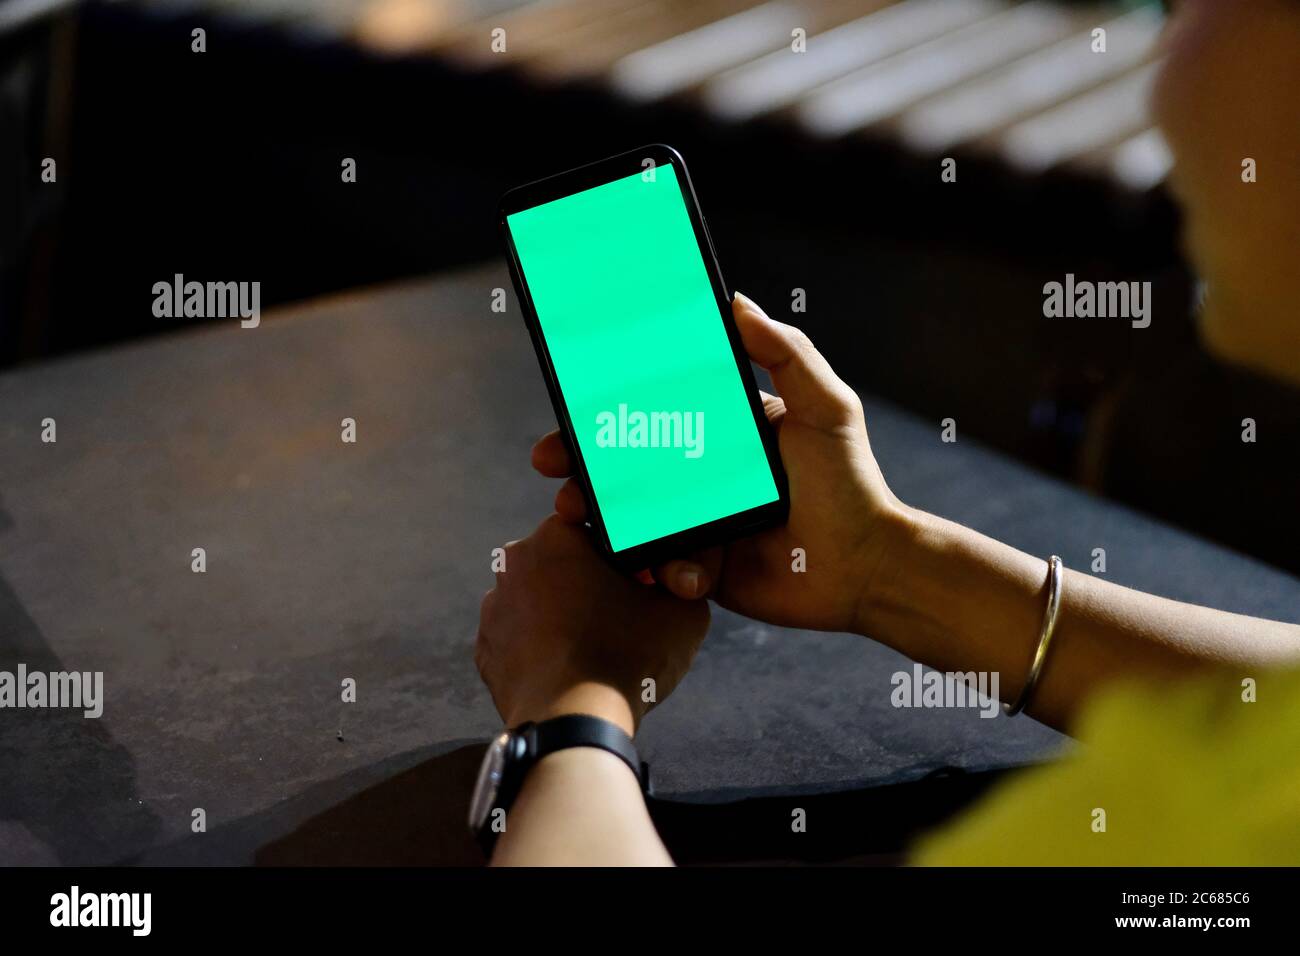 Over shoulder view of young man looking at green screen smartphone outdoor at night. Blur background Stock Photo